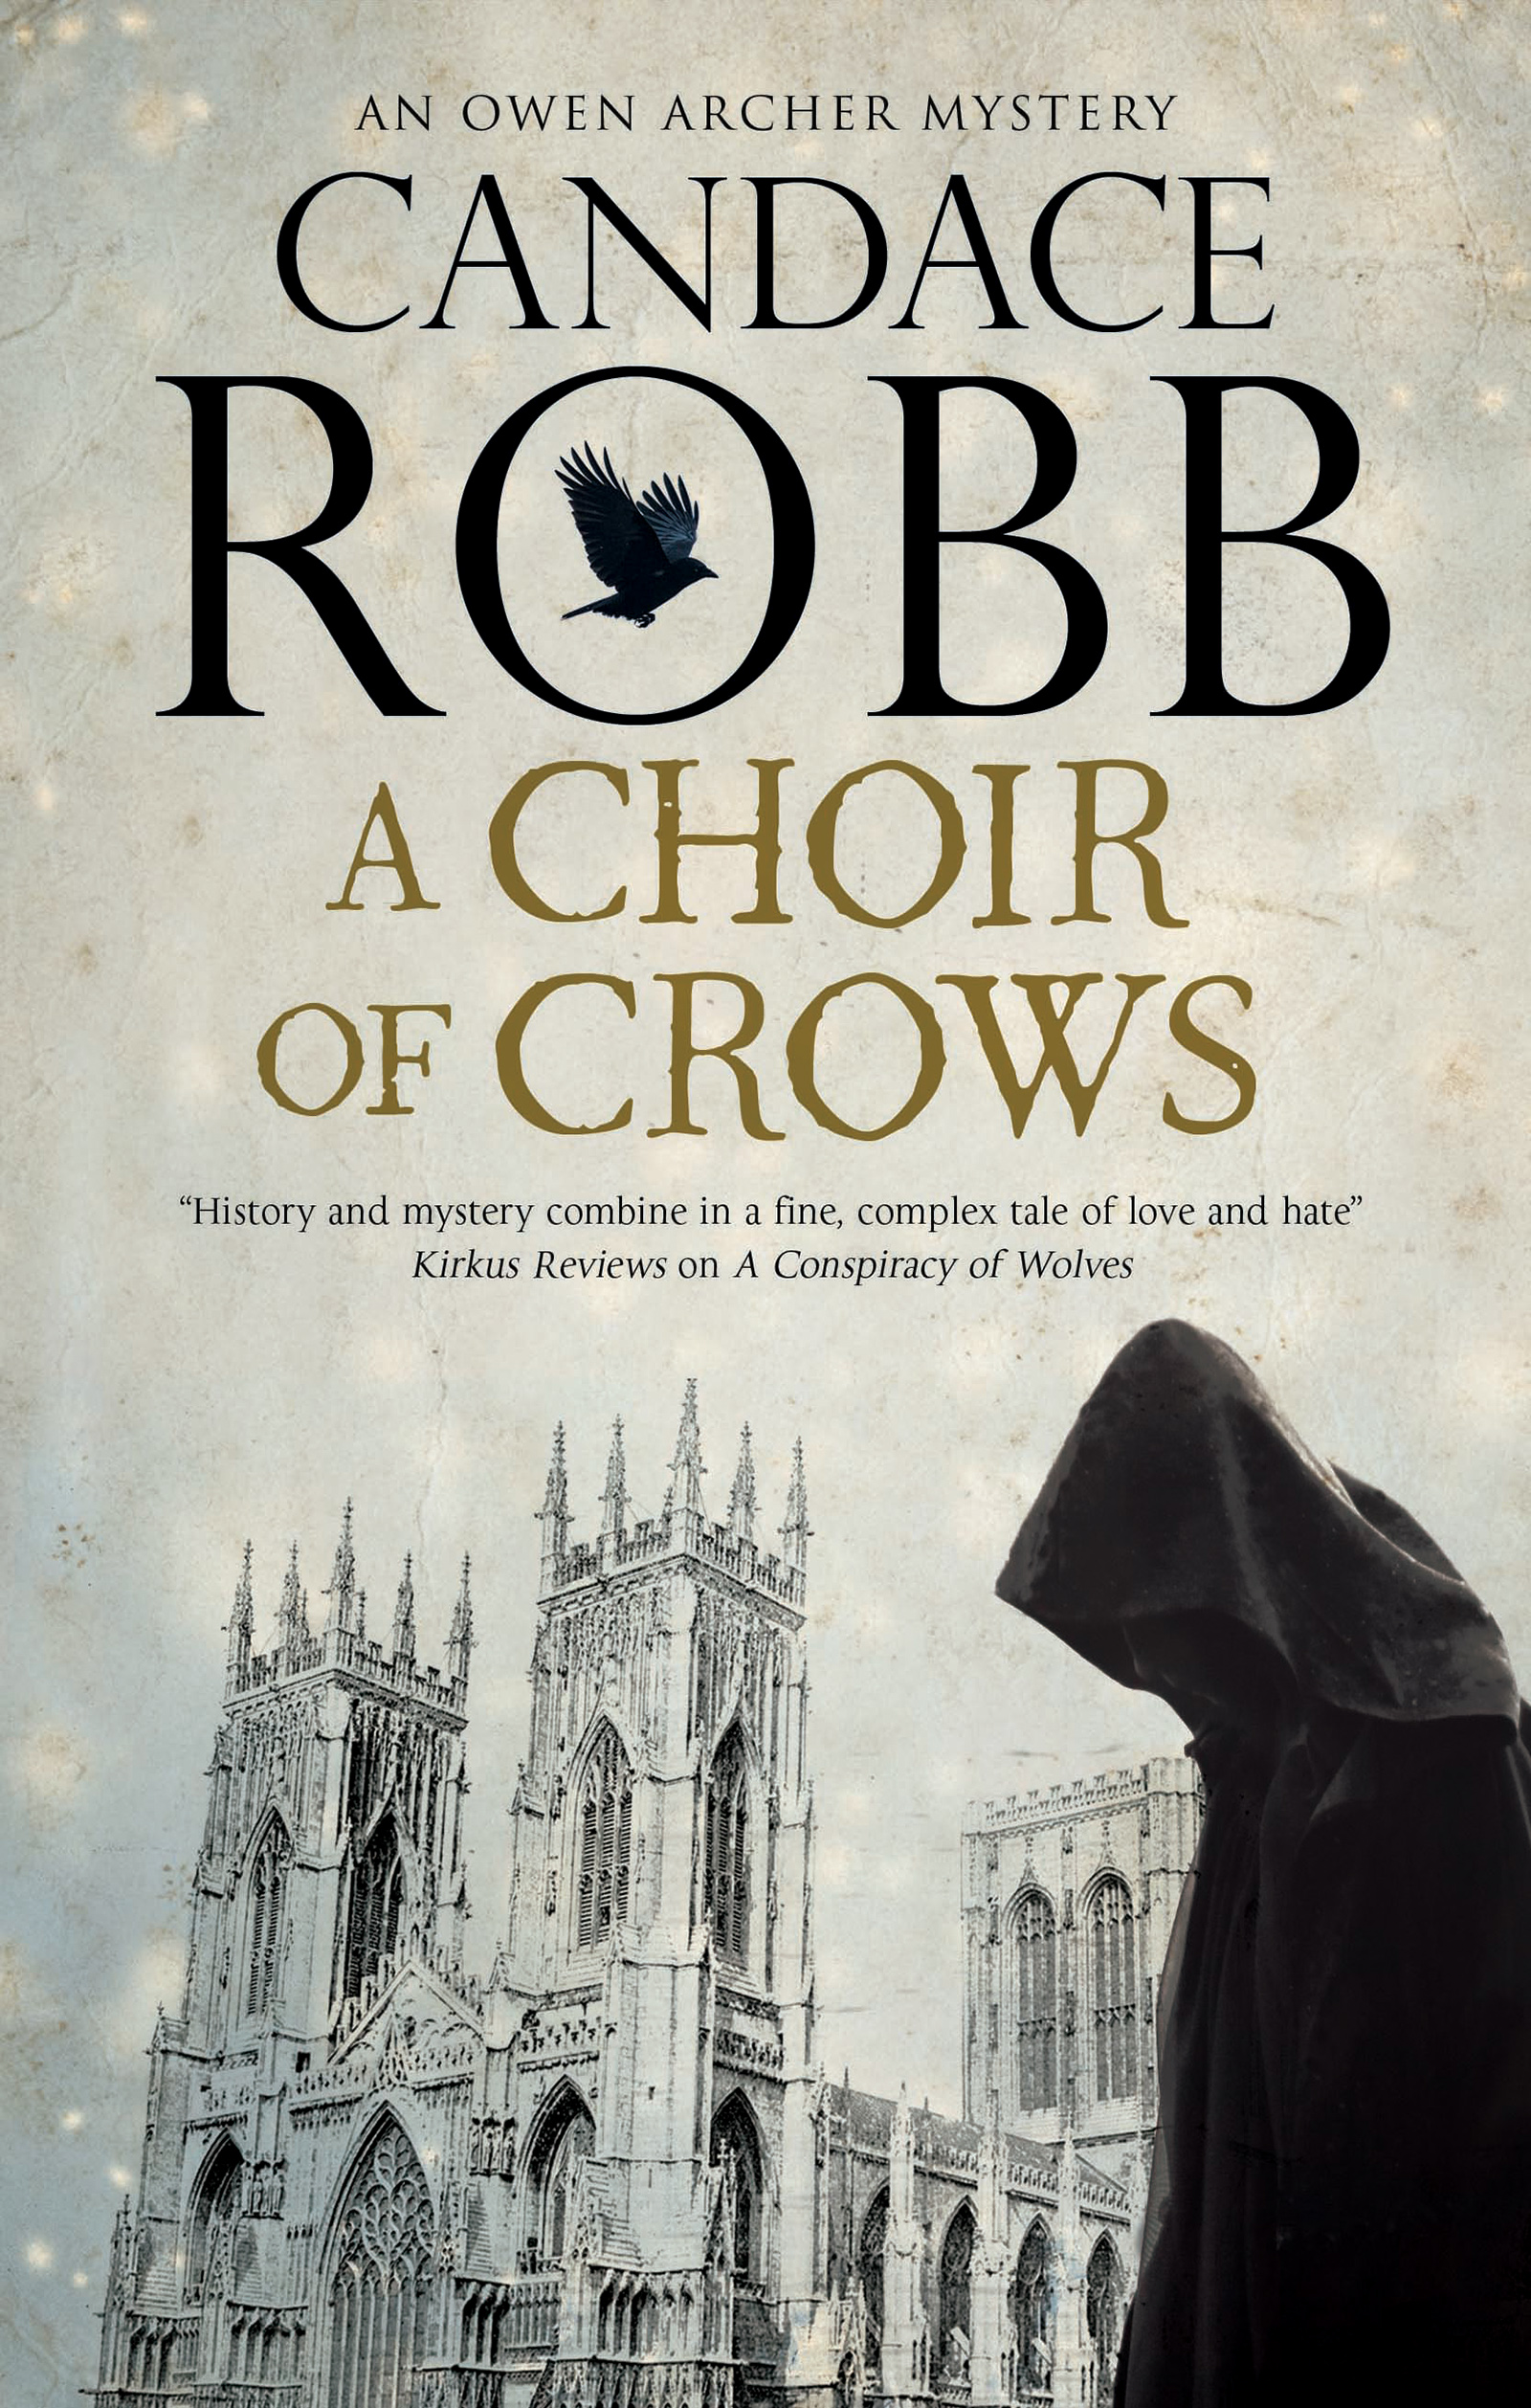 Candace Robb Returns to Medieval York in <i>A Choir of Crows</i>